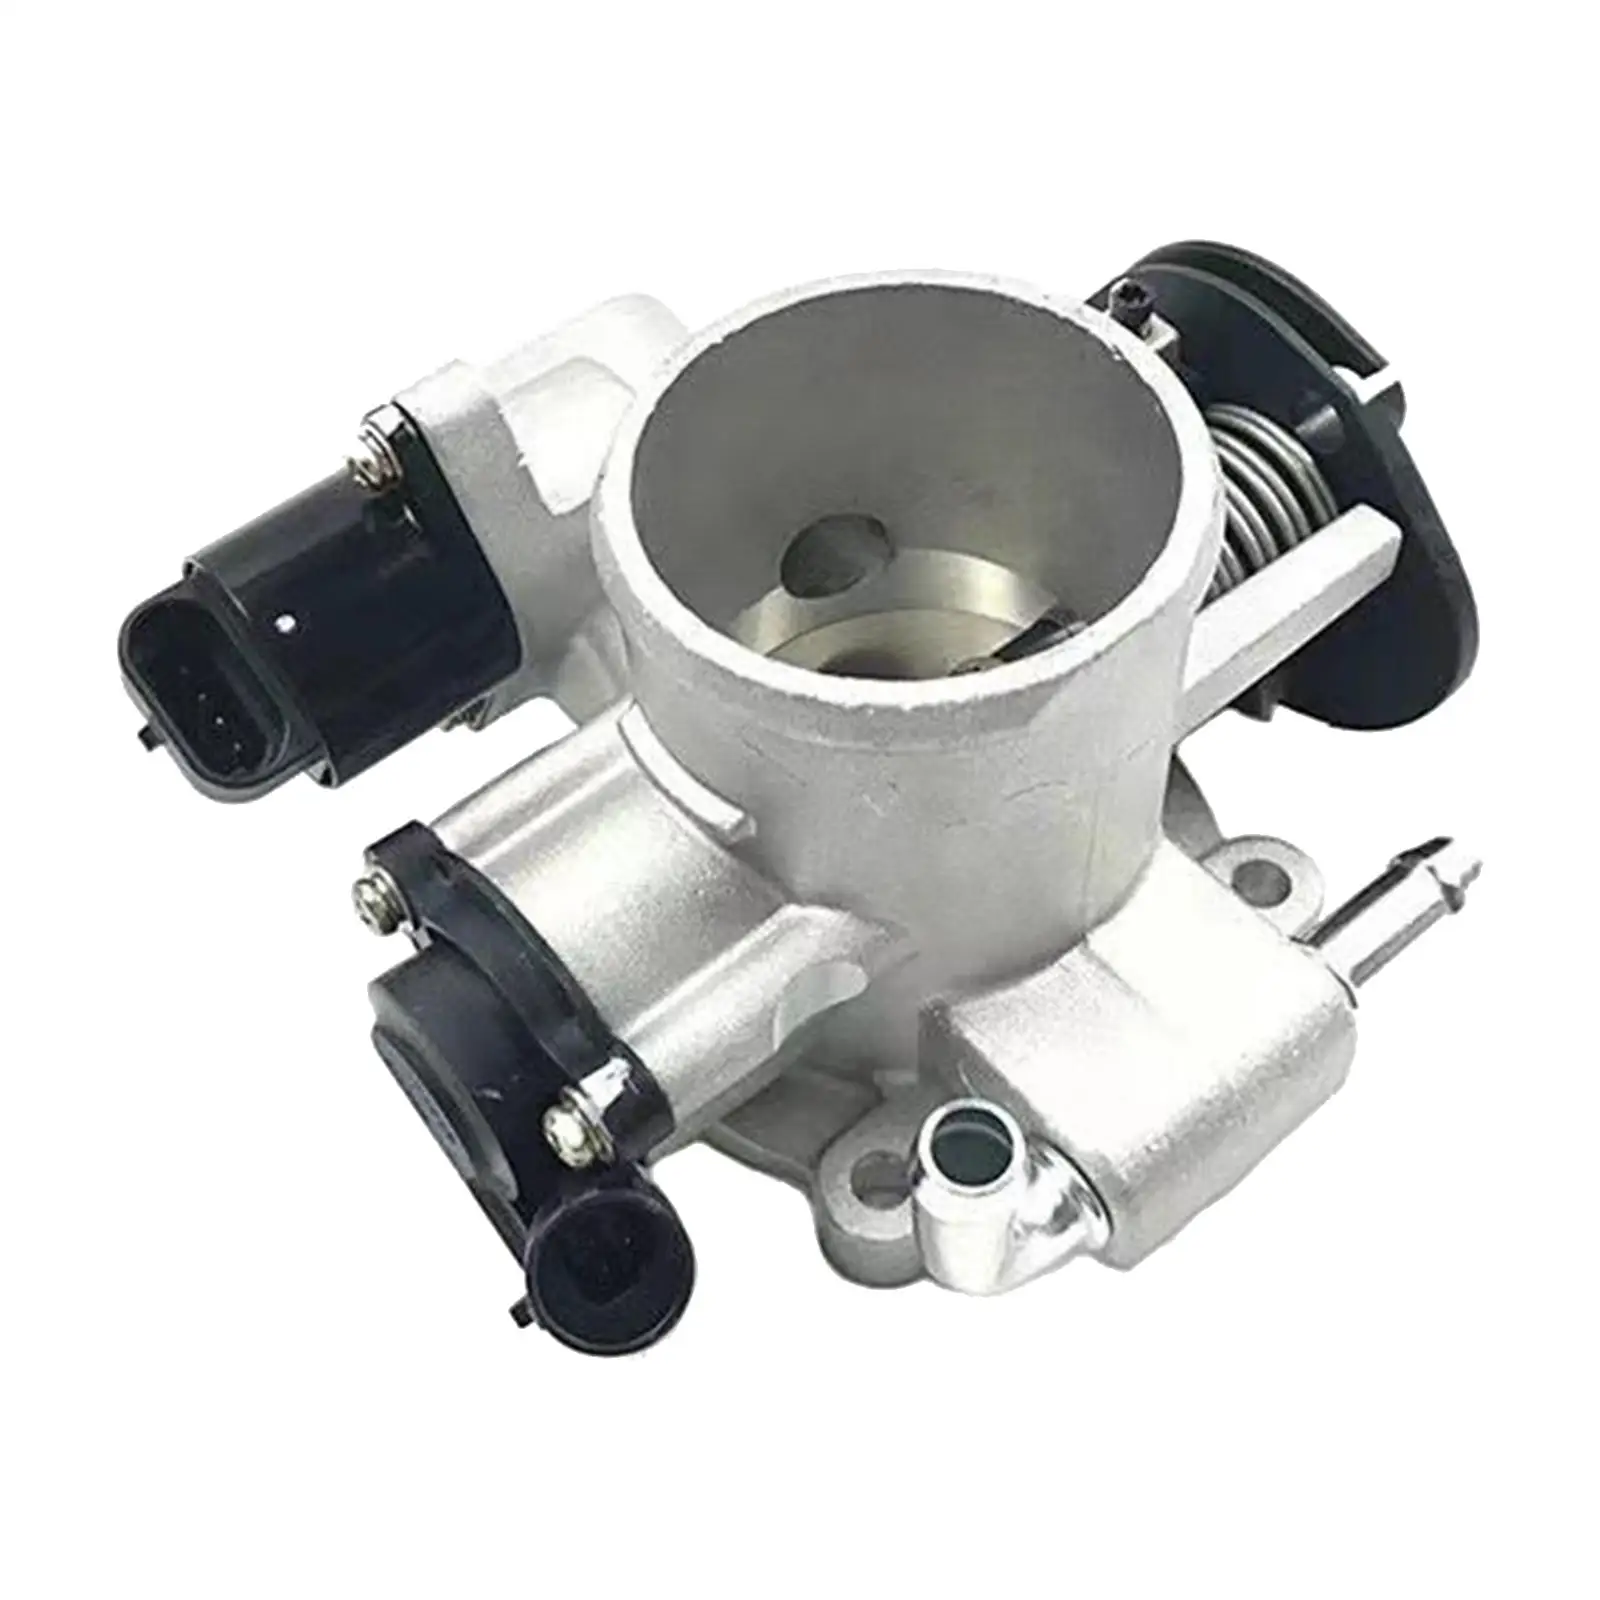 Electronic Throttle Body Assembly 96815470 96378856 for Chevrolet Zentra Automobile Repairing Accessory Easily Install